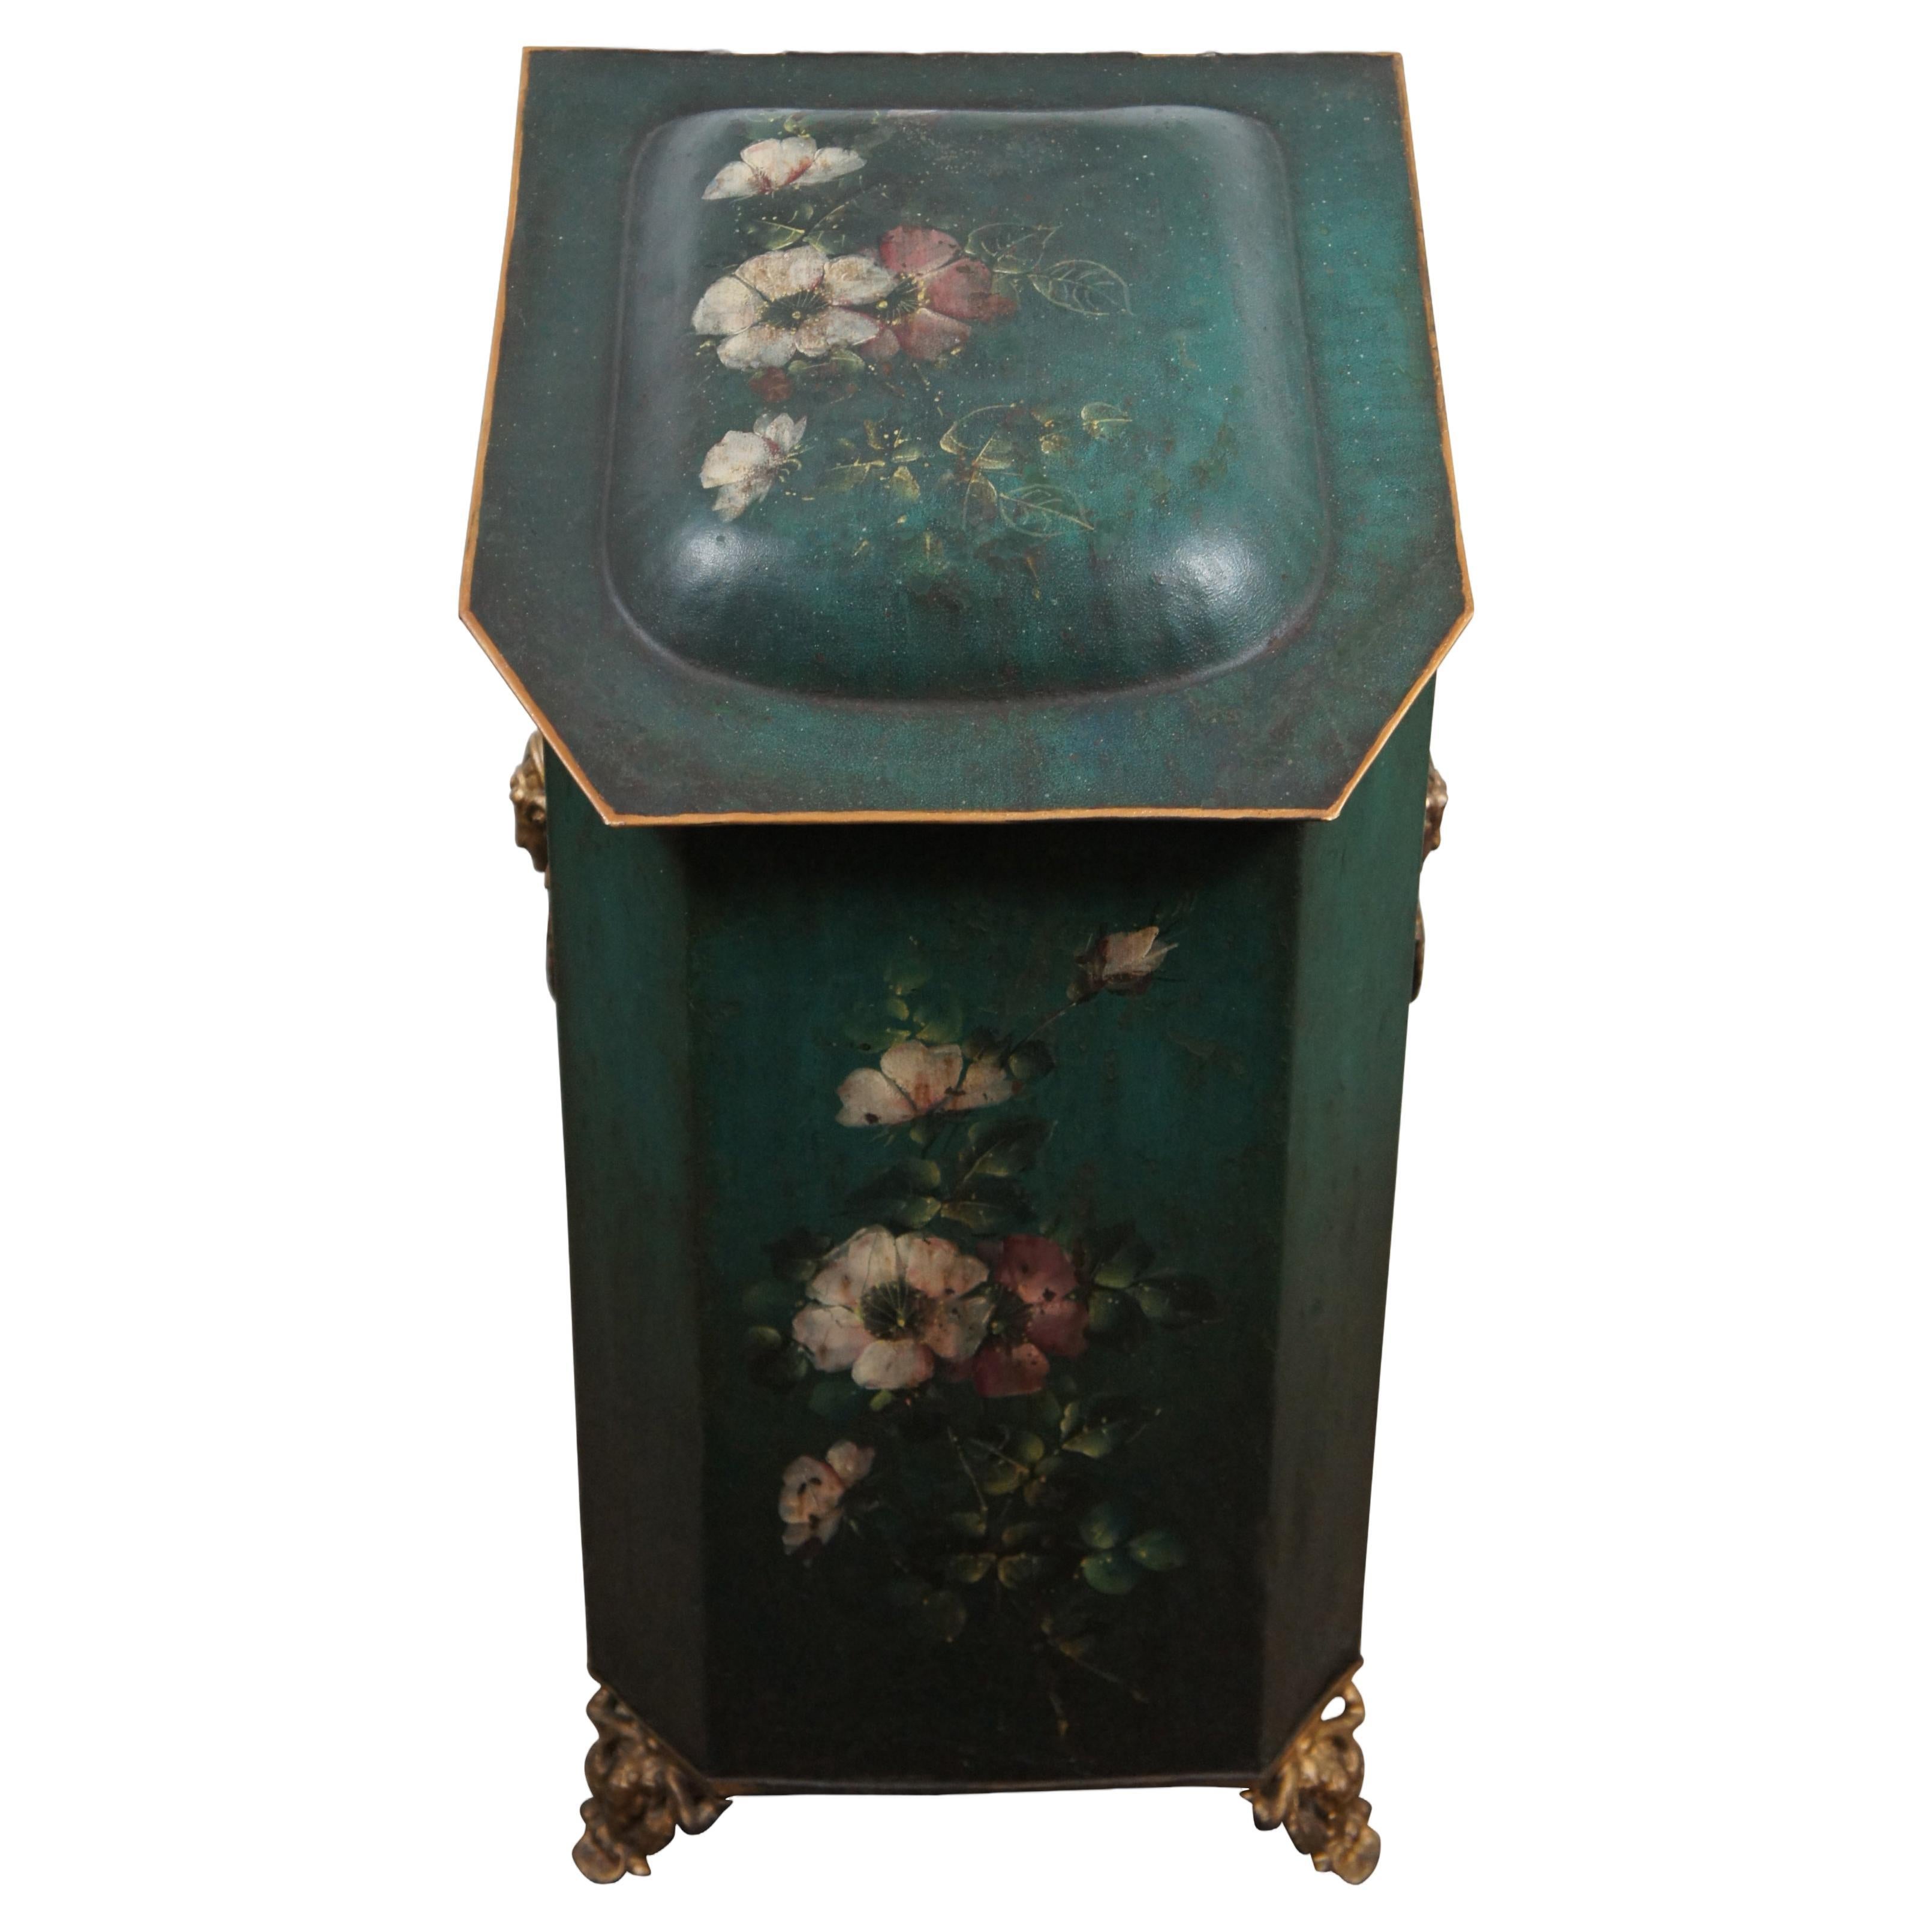 An impressive antique Victorian Renaissance revival coal hod / bin or scuttle, circa 1870s.  Made of metal / tin with hinged lid featuring lustrous green floral hand painted tole design.  Features ornate gold figural brass door knocker handles over